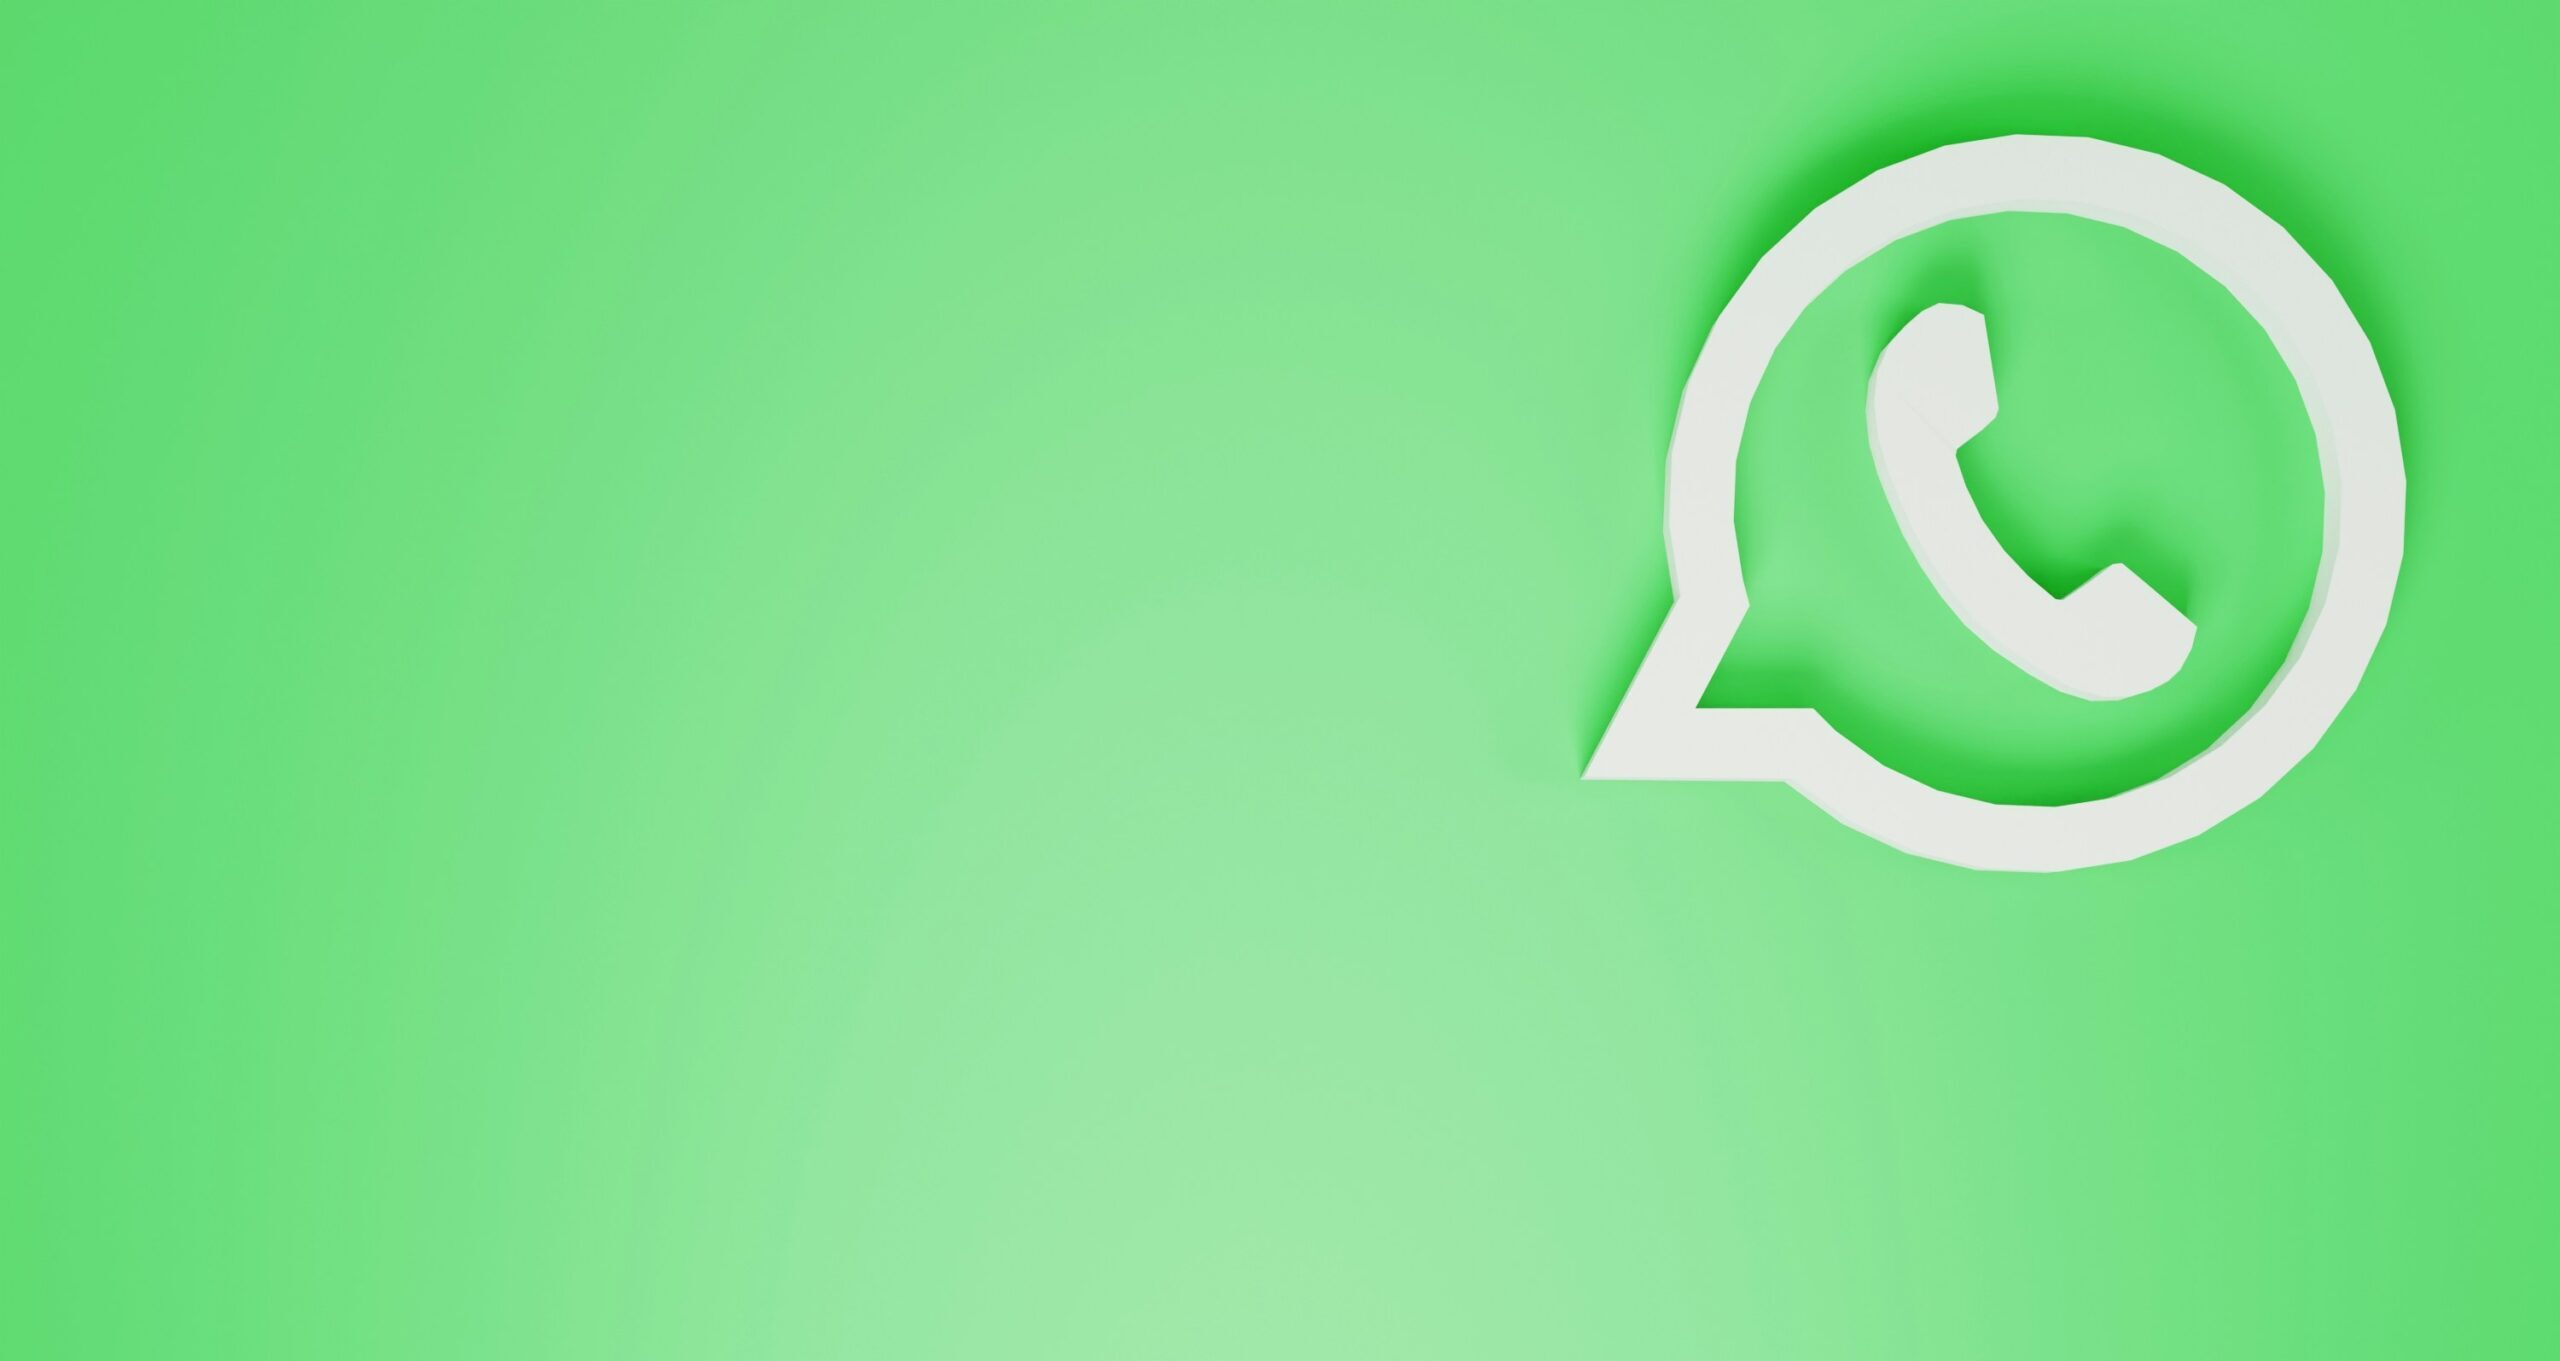 Introducing Our New Communication Channel: WhatsApp Business